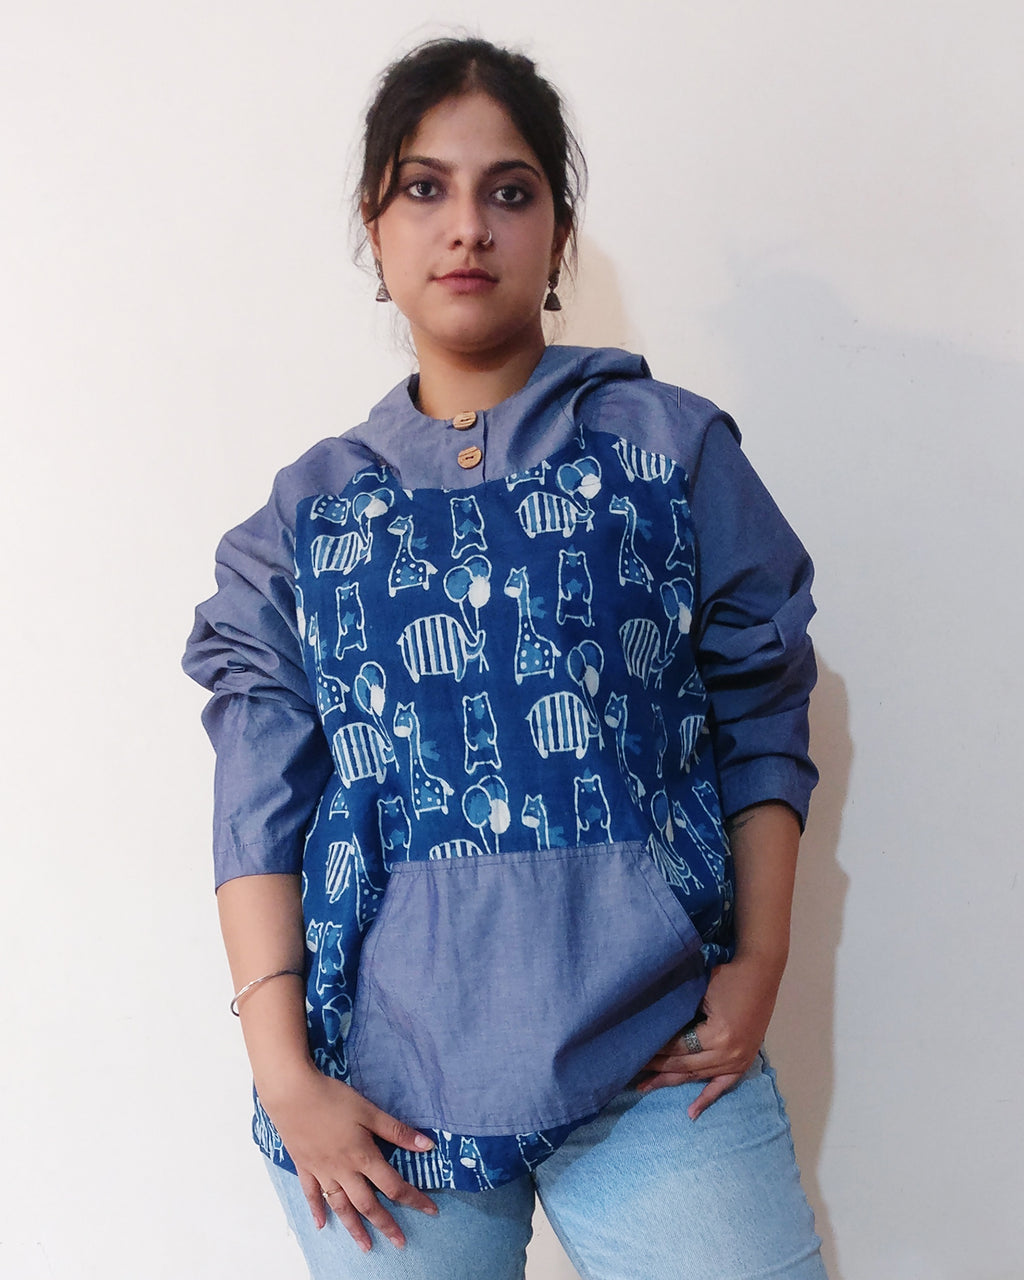 Come, animal lovers! This cute Indigo animal print hoodie would make you feel happy whole day. Shop online!